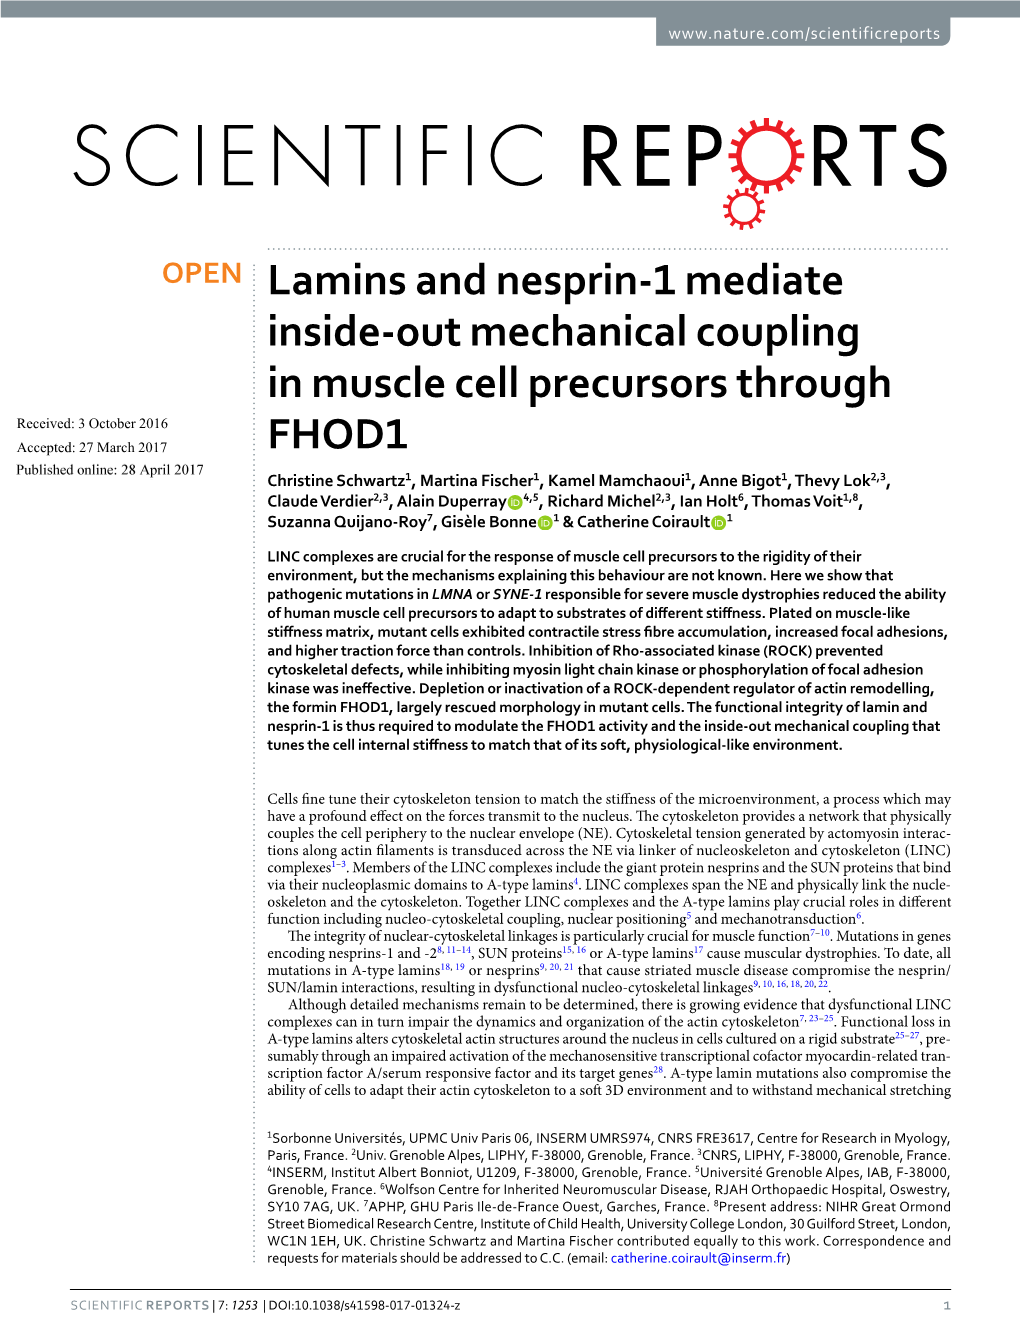 Lamins and Nesprin-1 Mediate Inside-Out Mechanical Coupling In